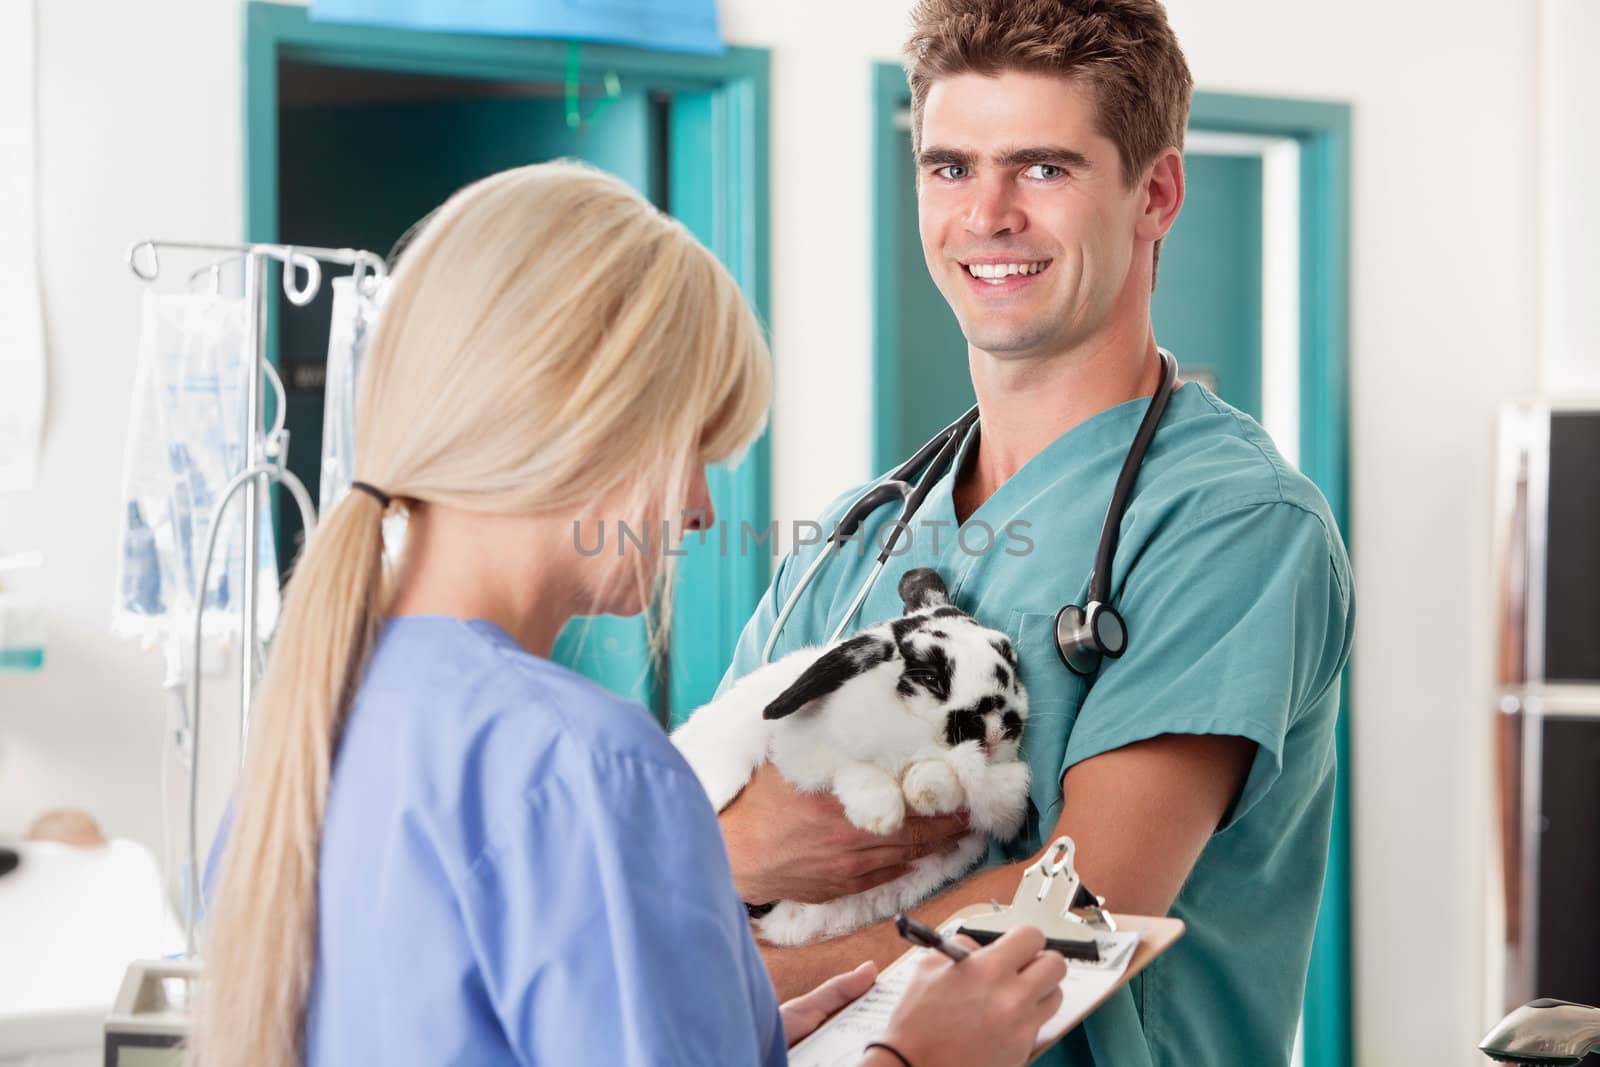 Veterinarian holding rabbit and his coworker taking report by leaf